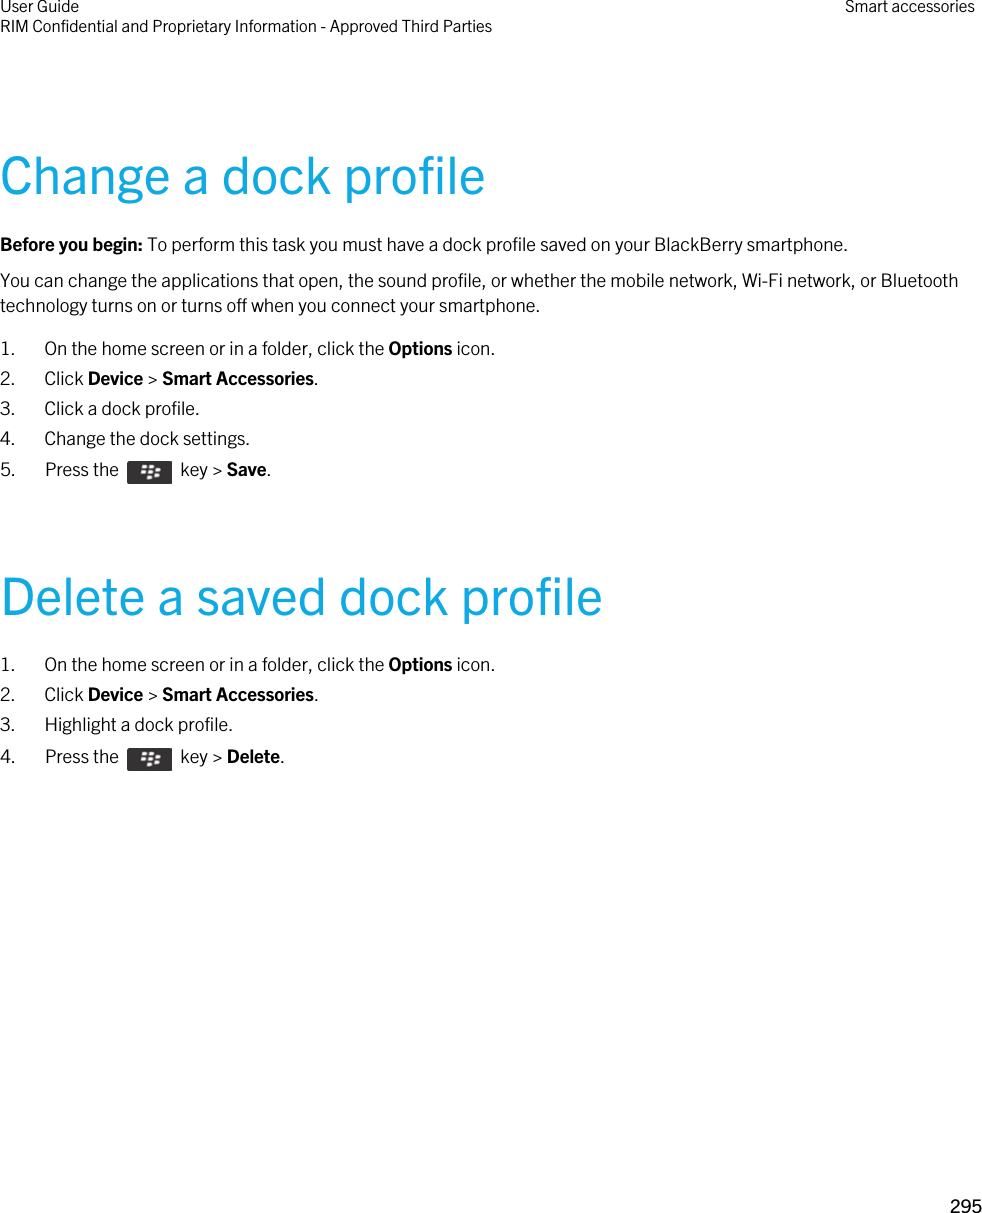 Change a dock profileBefore you begin: To perform this task you must have a dock profile saved on your BlackBerry smartphone.You can change the applications that open, the sound profile, or whether the mobile network, Wi-Fi network, or Bluetooth technology turns on or turns off when you connect your smartphone.1. On the home screen or in a folder, click the Options icon.2. Click Device &gt; Smart Accessories.3. Click a dock profile.4. Change the dock settings.5.  Press the    key &gt; Save. Delete a saved dock profile1. On the home screen or in a folder, click the Options icon.2. Click Device &gt; Smart Accessories.3. Highlight a dock profile.4.  Press the    key &gt; Delete. User GuideRIM Confidential and Proprietary Information - Approved Third Parties Smart accessories295 